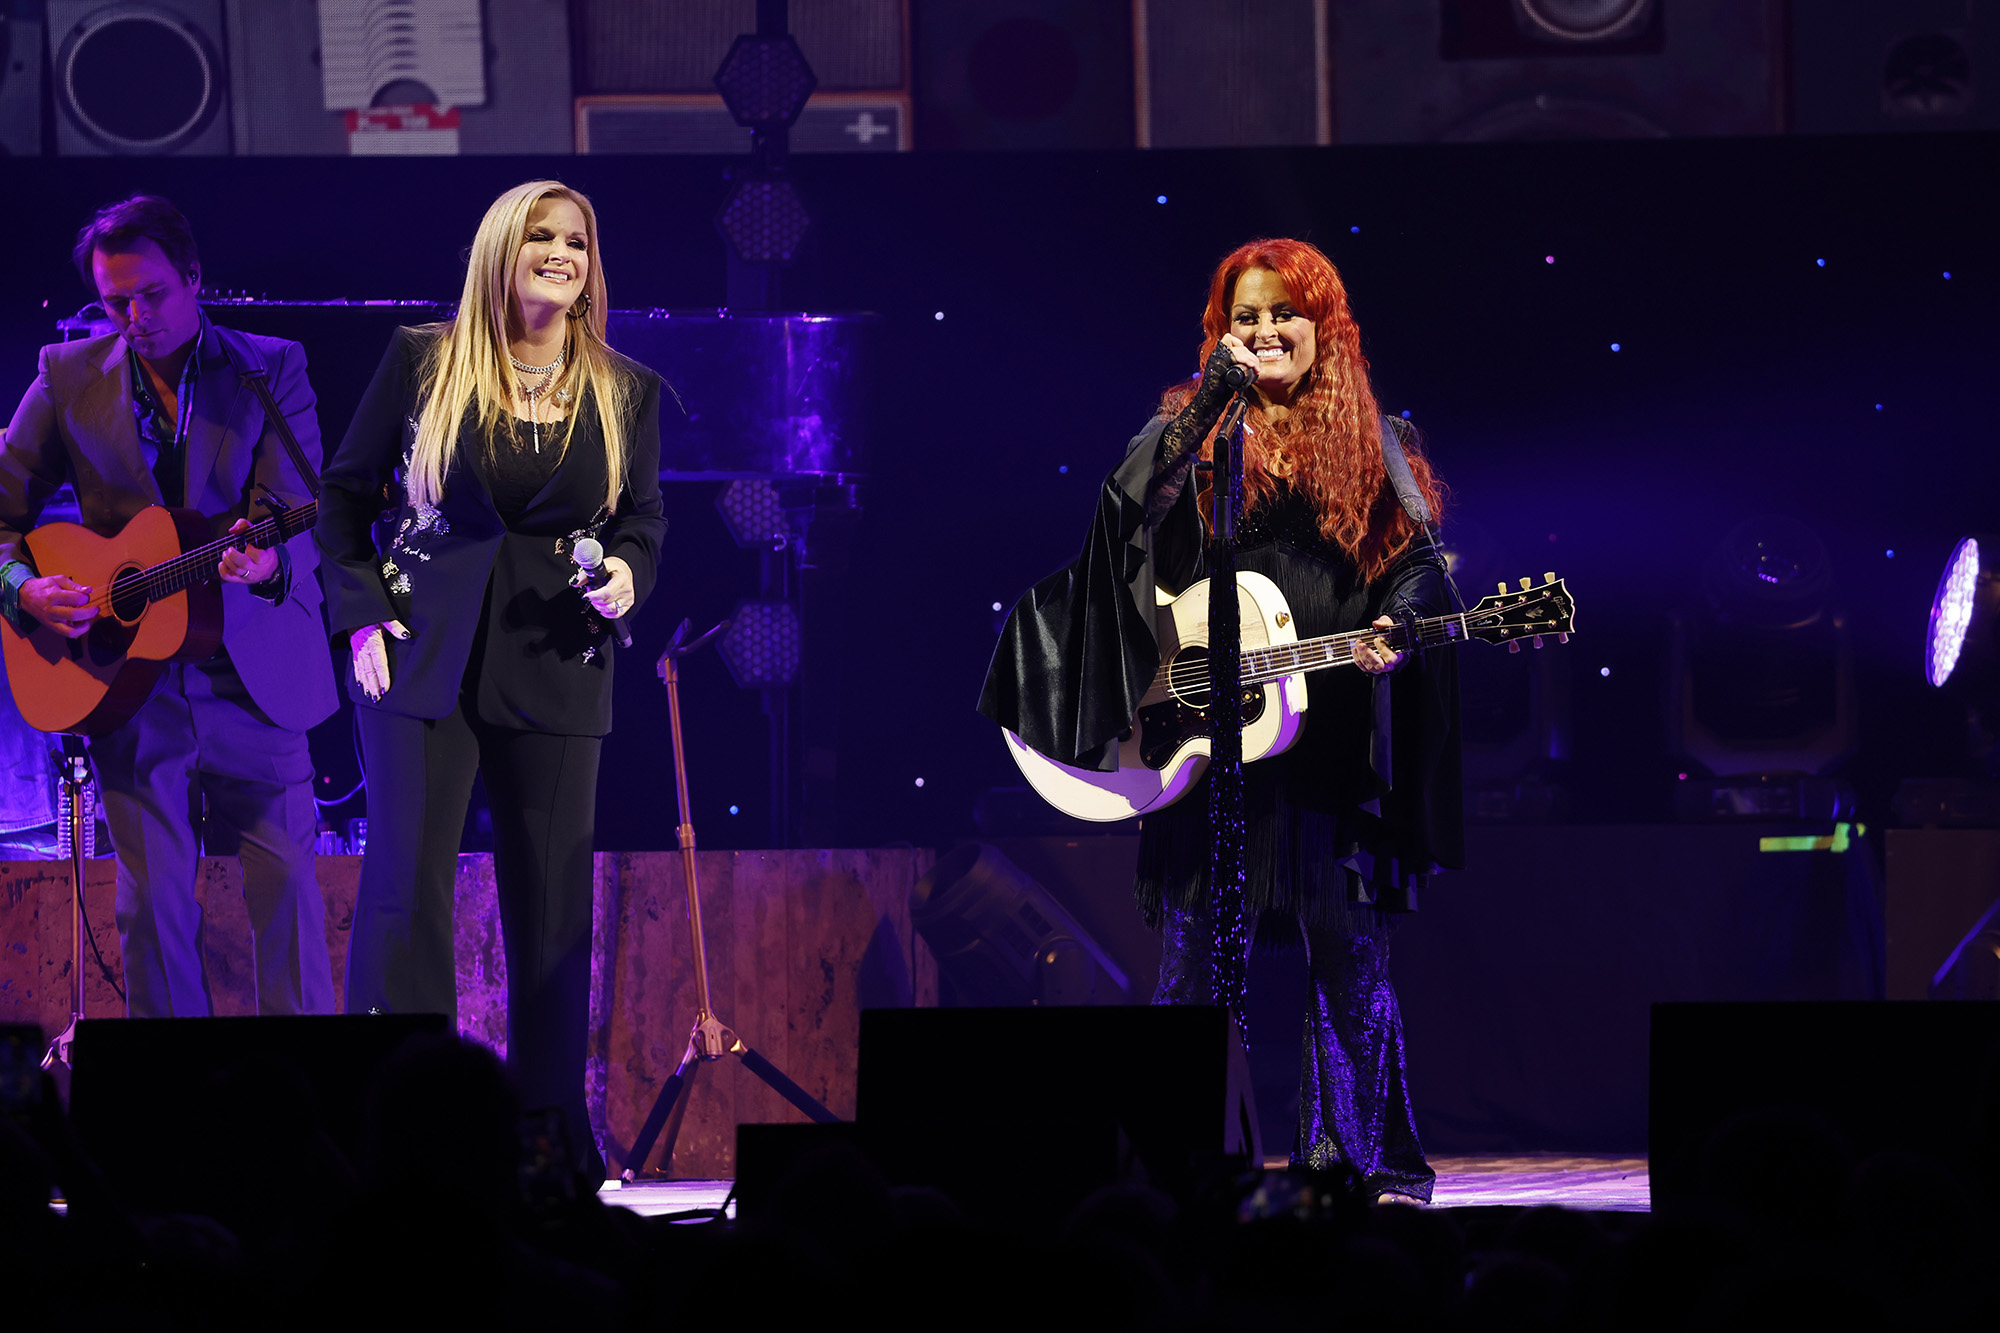 PHOTO: Wynonna Judd performs onstage during The Judds: The Final Tour in Nashville, Tenn., Oct. 28, 2022.